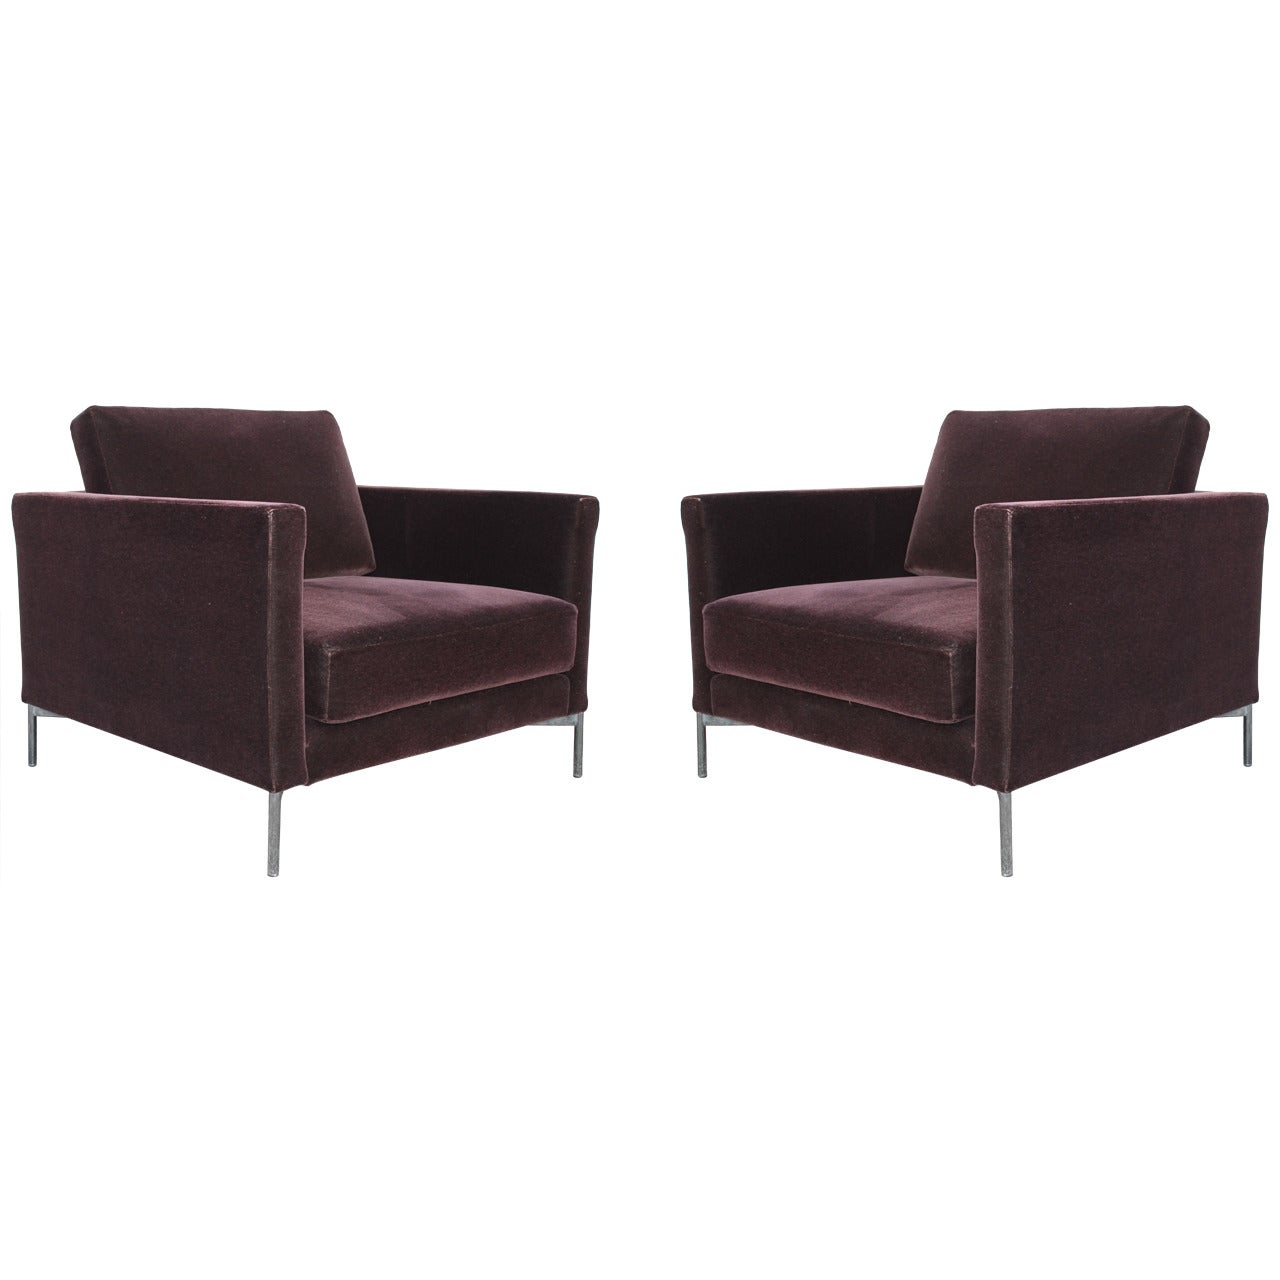 Pair of Knoll Divina lounge chairs by Piero Lissoni